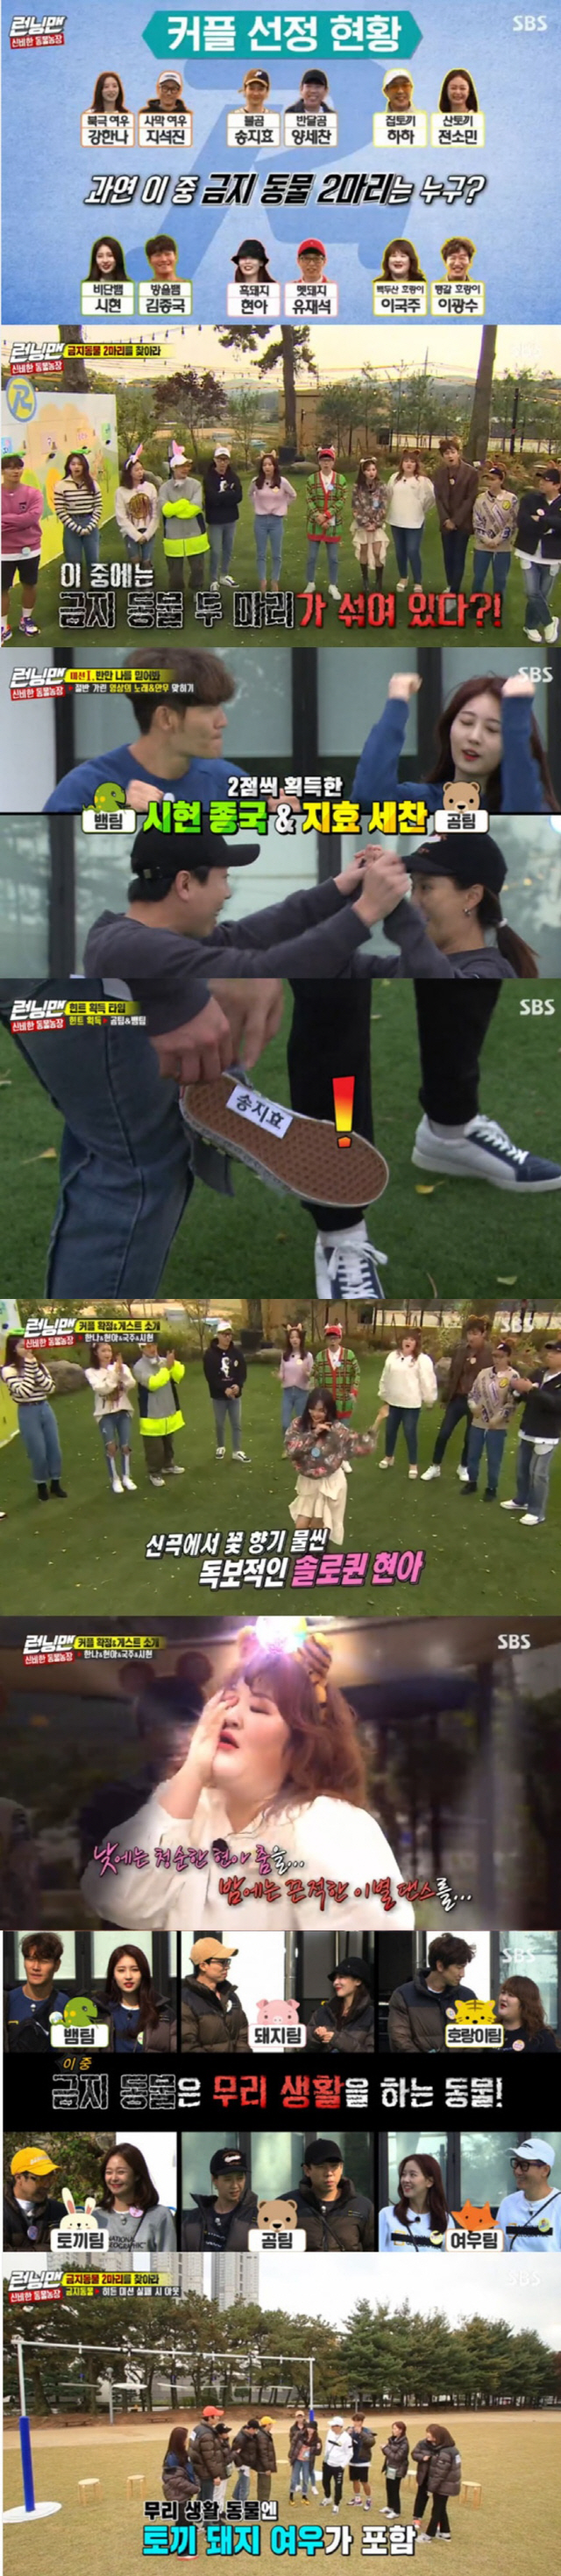 SBS Running Man TV viewer ratings are on the rise.The show was decorated with the Mysterious Animal Farm Race, featuring singer Hyona, actor Kang Han-Na, gag woman Lee Guk-joo and Everglow Sihyun.On this day, Race must find two banned animals that hide Identity, and if they get all the opponents out first, they win.Two banned animals must perform a hidden mission before the final race, and provide hints for the banned animal for each round winning couple.Yoo Jae-Suk - Hyona, Ji Suk-jin - Kang Han-Na, Kim Jong Kook - Shihyeon, Haha - Jeon Somin, Lee Kwang Soo - Lee Guk-joo, Yang Se-chan - Song Ji-hyo got hints about banned animals through each mission while couple.The hint was the name tag of Song Ji-hyo, Forbidden animals live in groups, and rabbits and pig foxes were narrowed down to prohibited animals.The scene took the best one minute with the Per minute top TV viewer ratings of 8.2%, while the Identity of the banned animal will be released on the air next week.